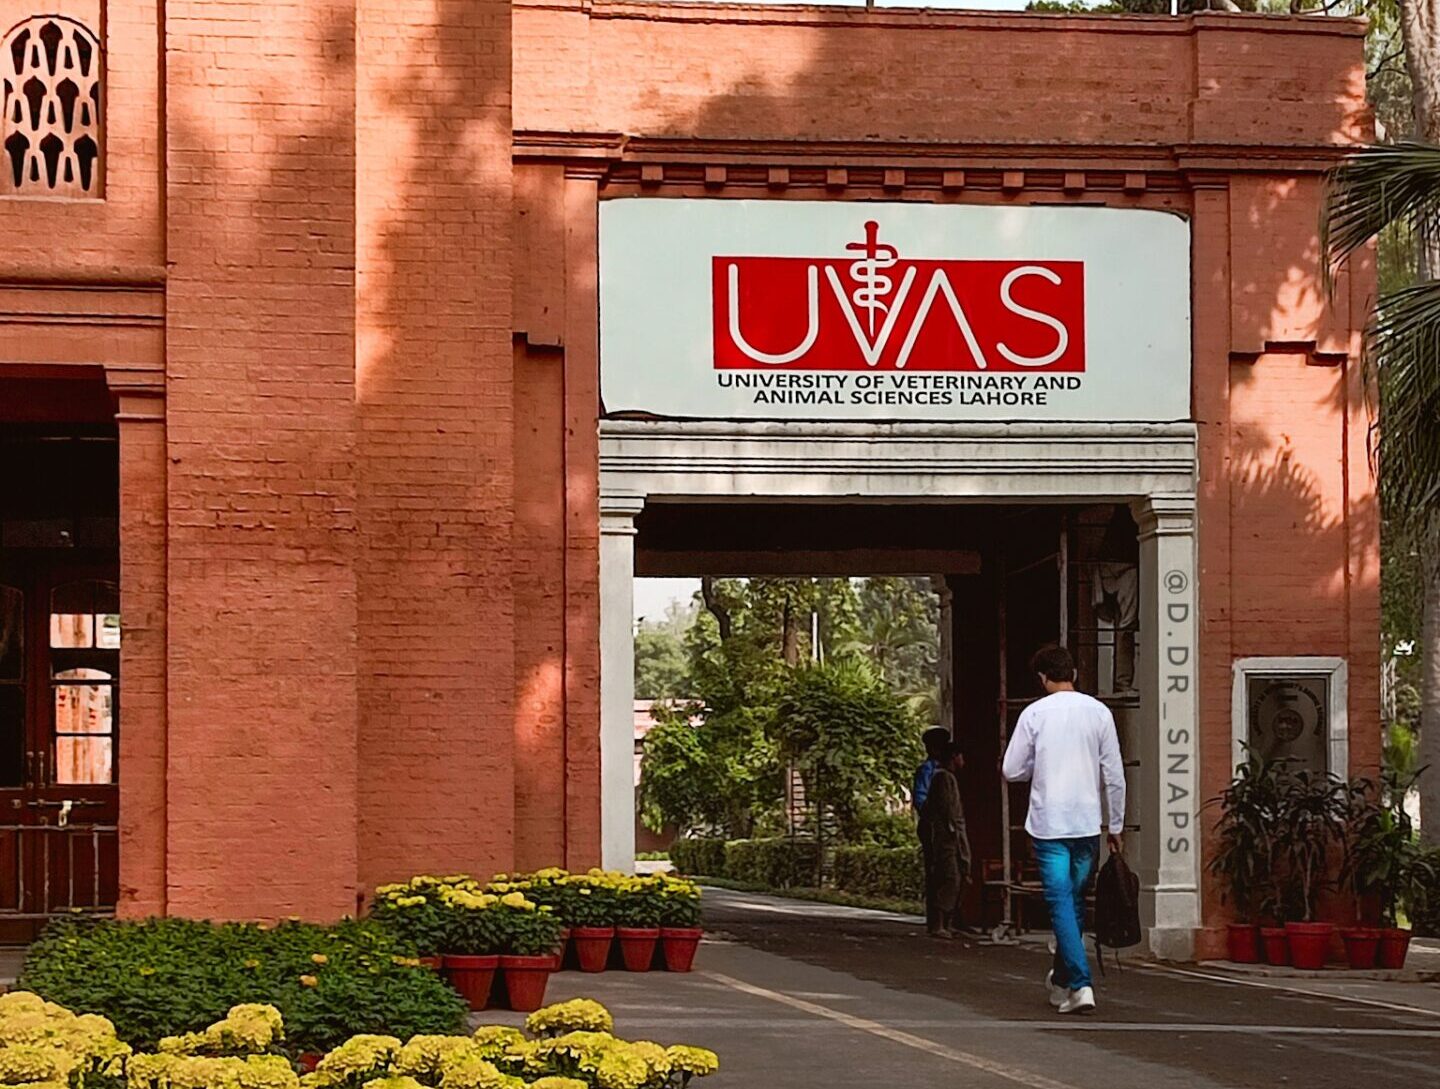 UVAS won five competitive research funding projects from PARB